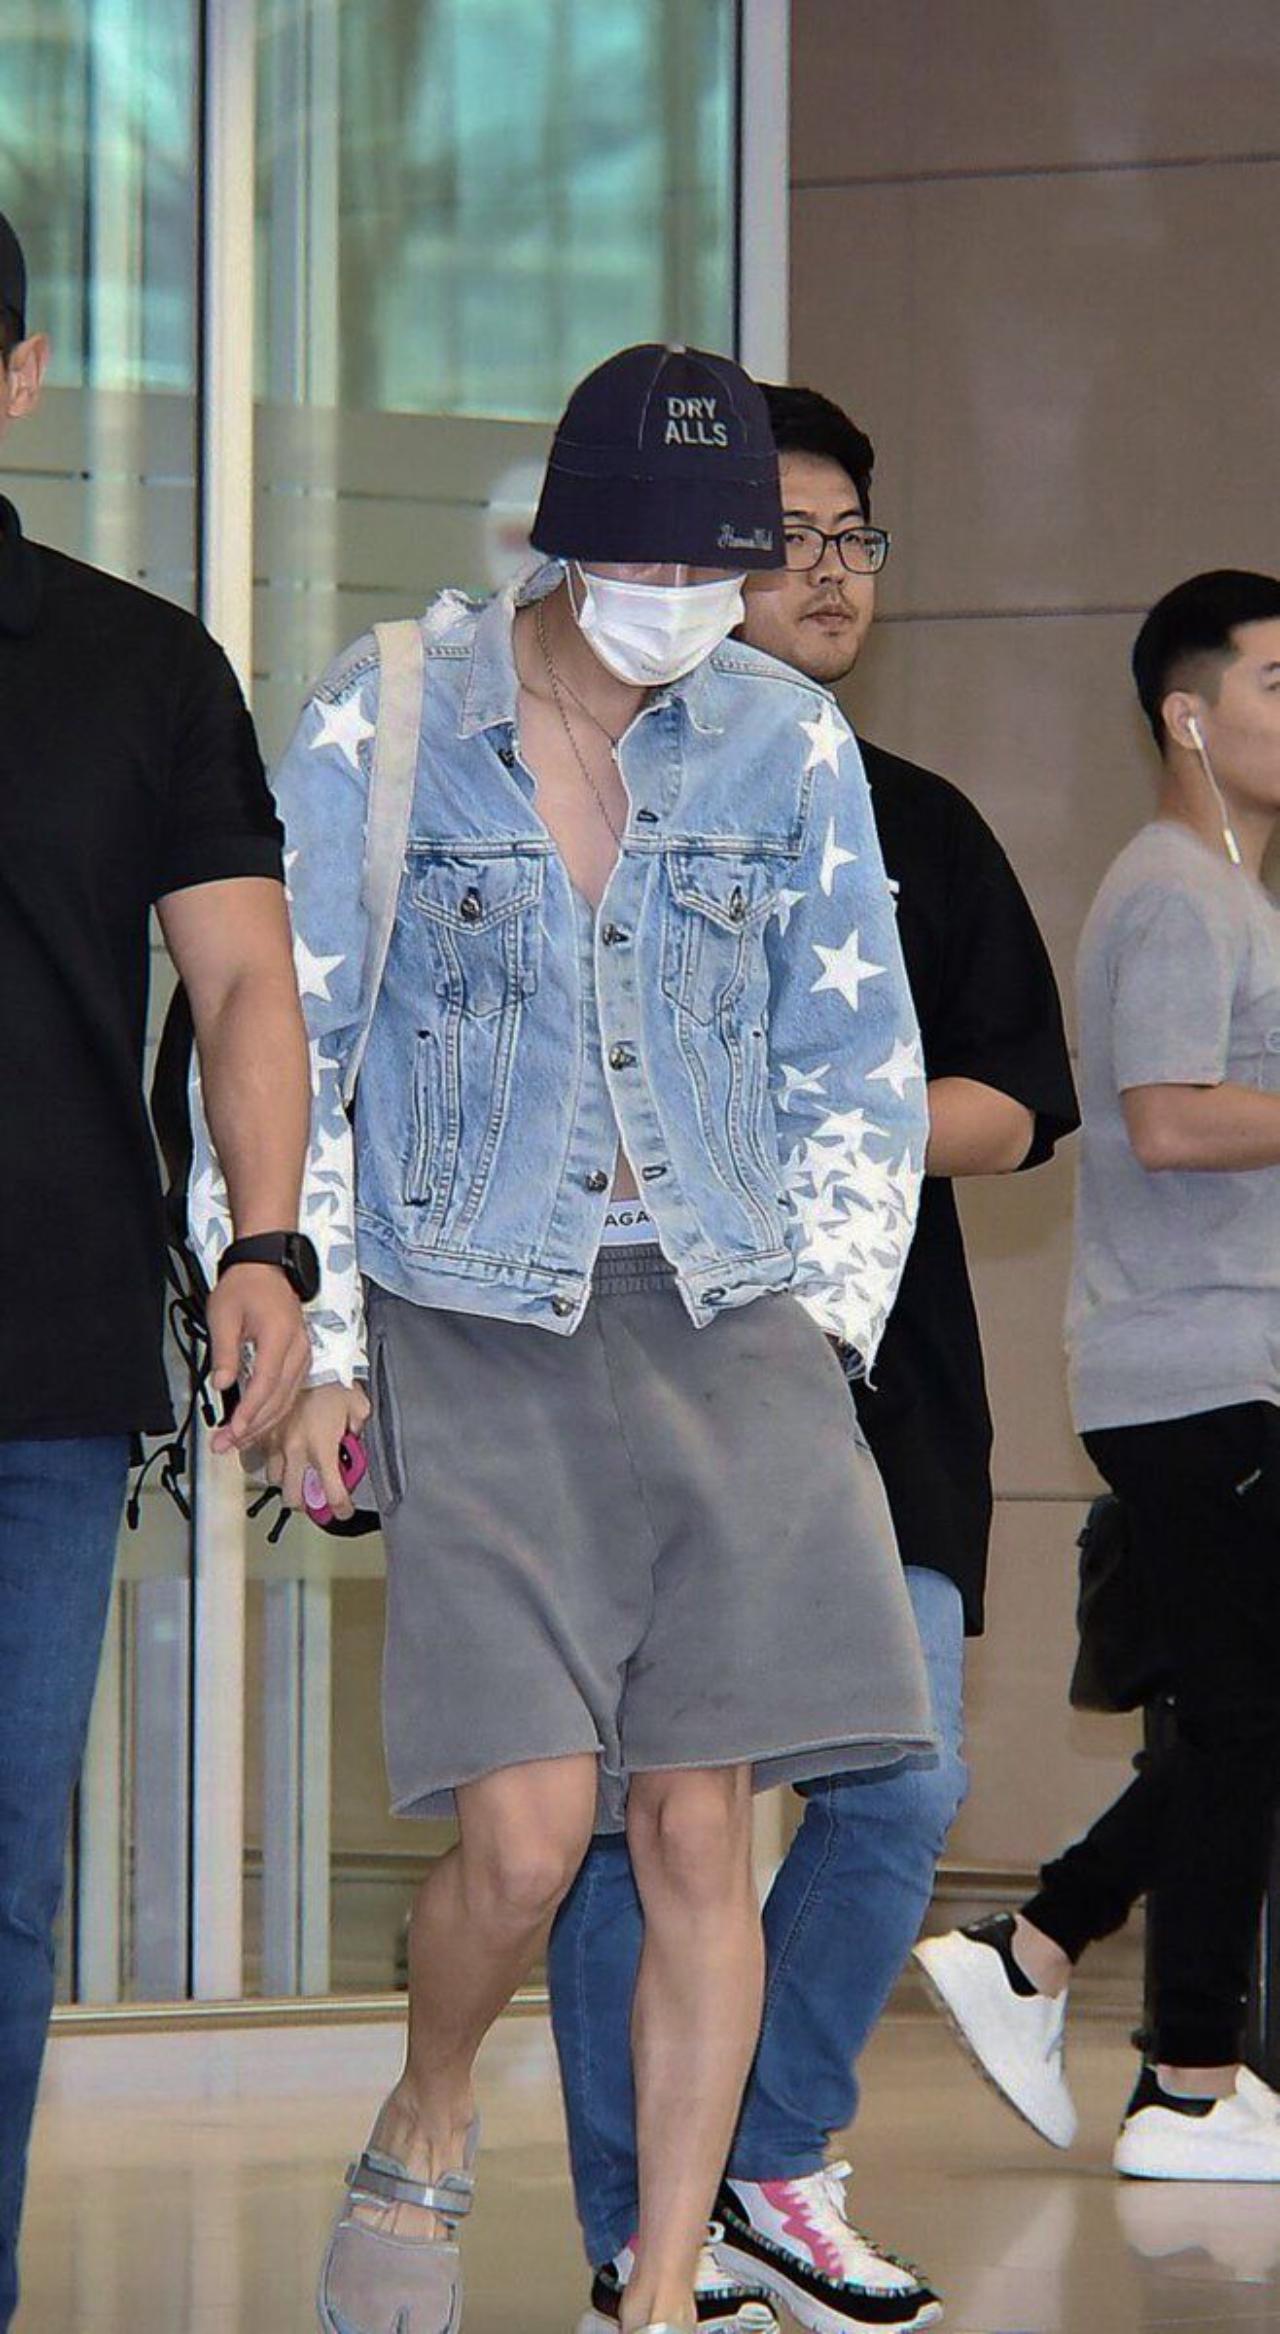 Speaking of airport looks, ARMYs can never forget this iconic J-Hope look. The artist wore a star-printed denim jacket and flaunted his collarbones